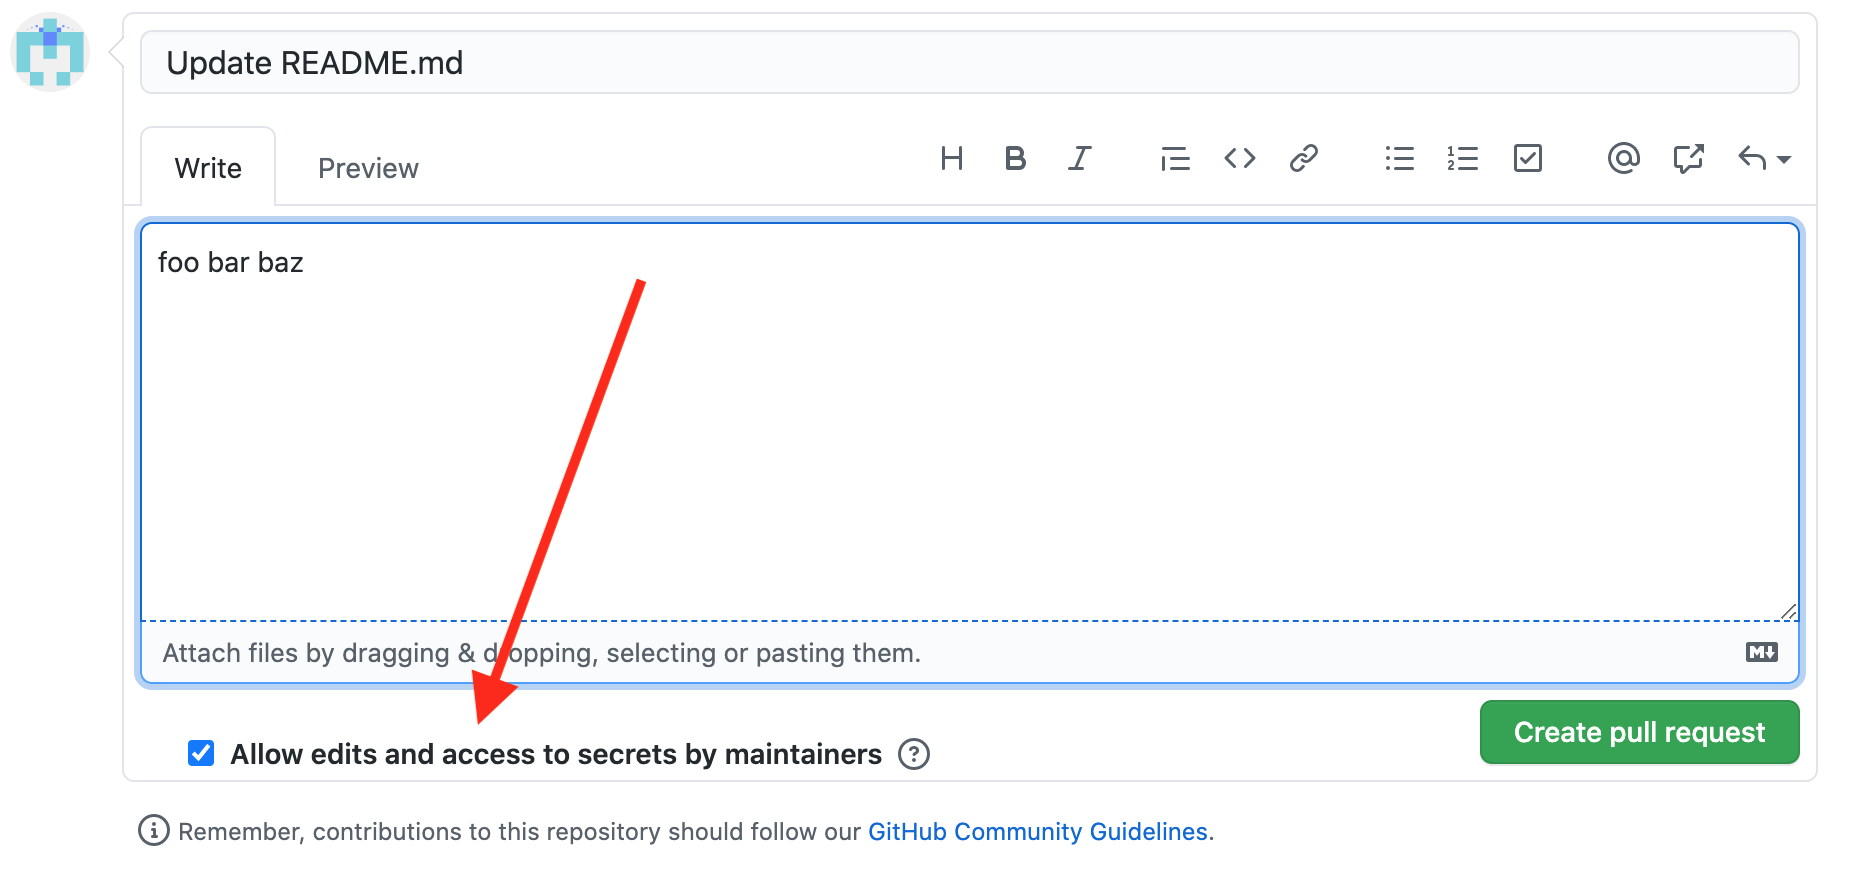 A screenshot of GitHub's form to create a new pull request. The proposed title for the pull request is "Update README.md". The proposed description is "foo bar baz". There is a checkbox at the bottom of the pull request labeled "Allow edits and access to secrets by maintainers", which is currently checked. The screenshot is annotated with a red arrow pointing to the checkbox.